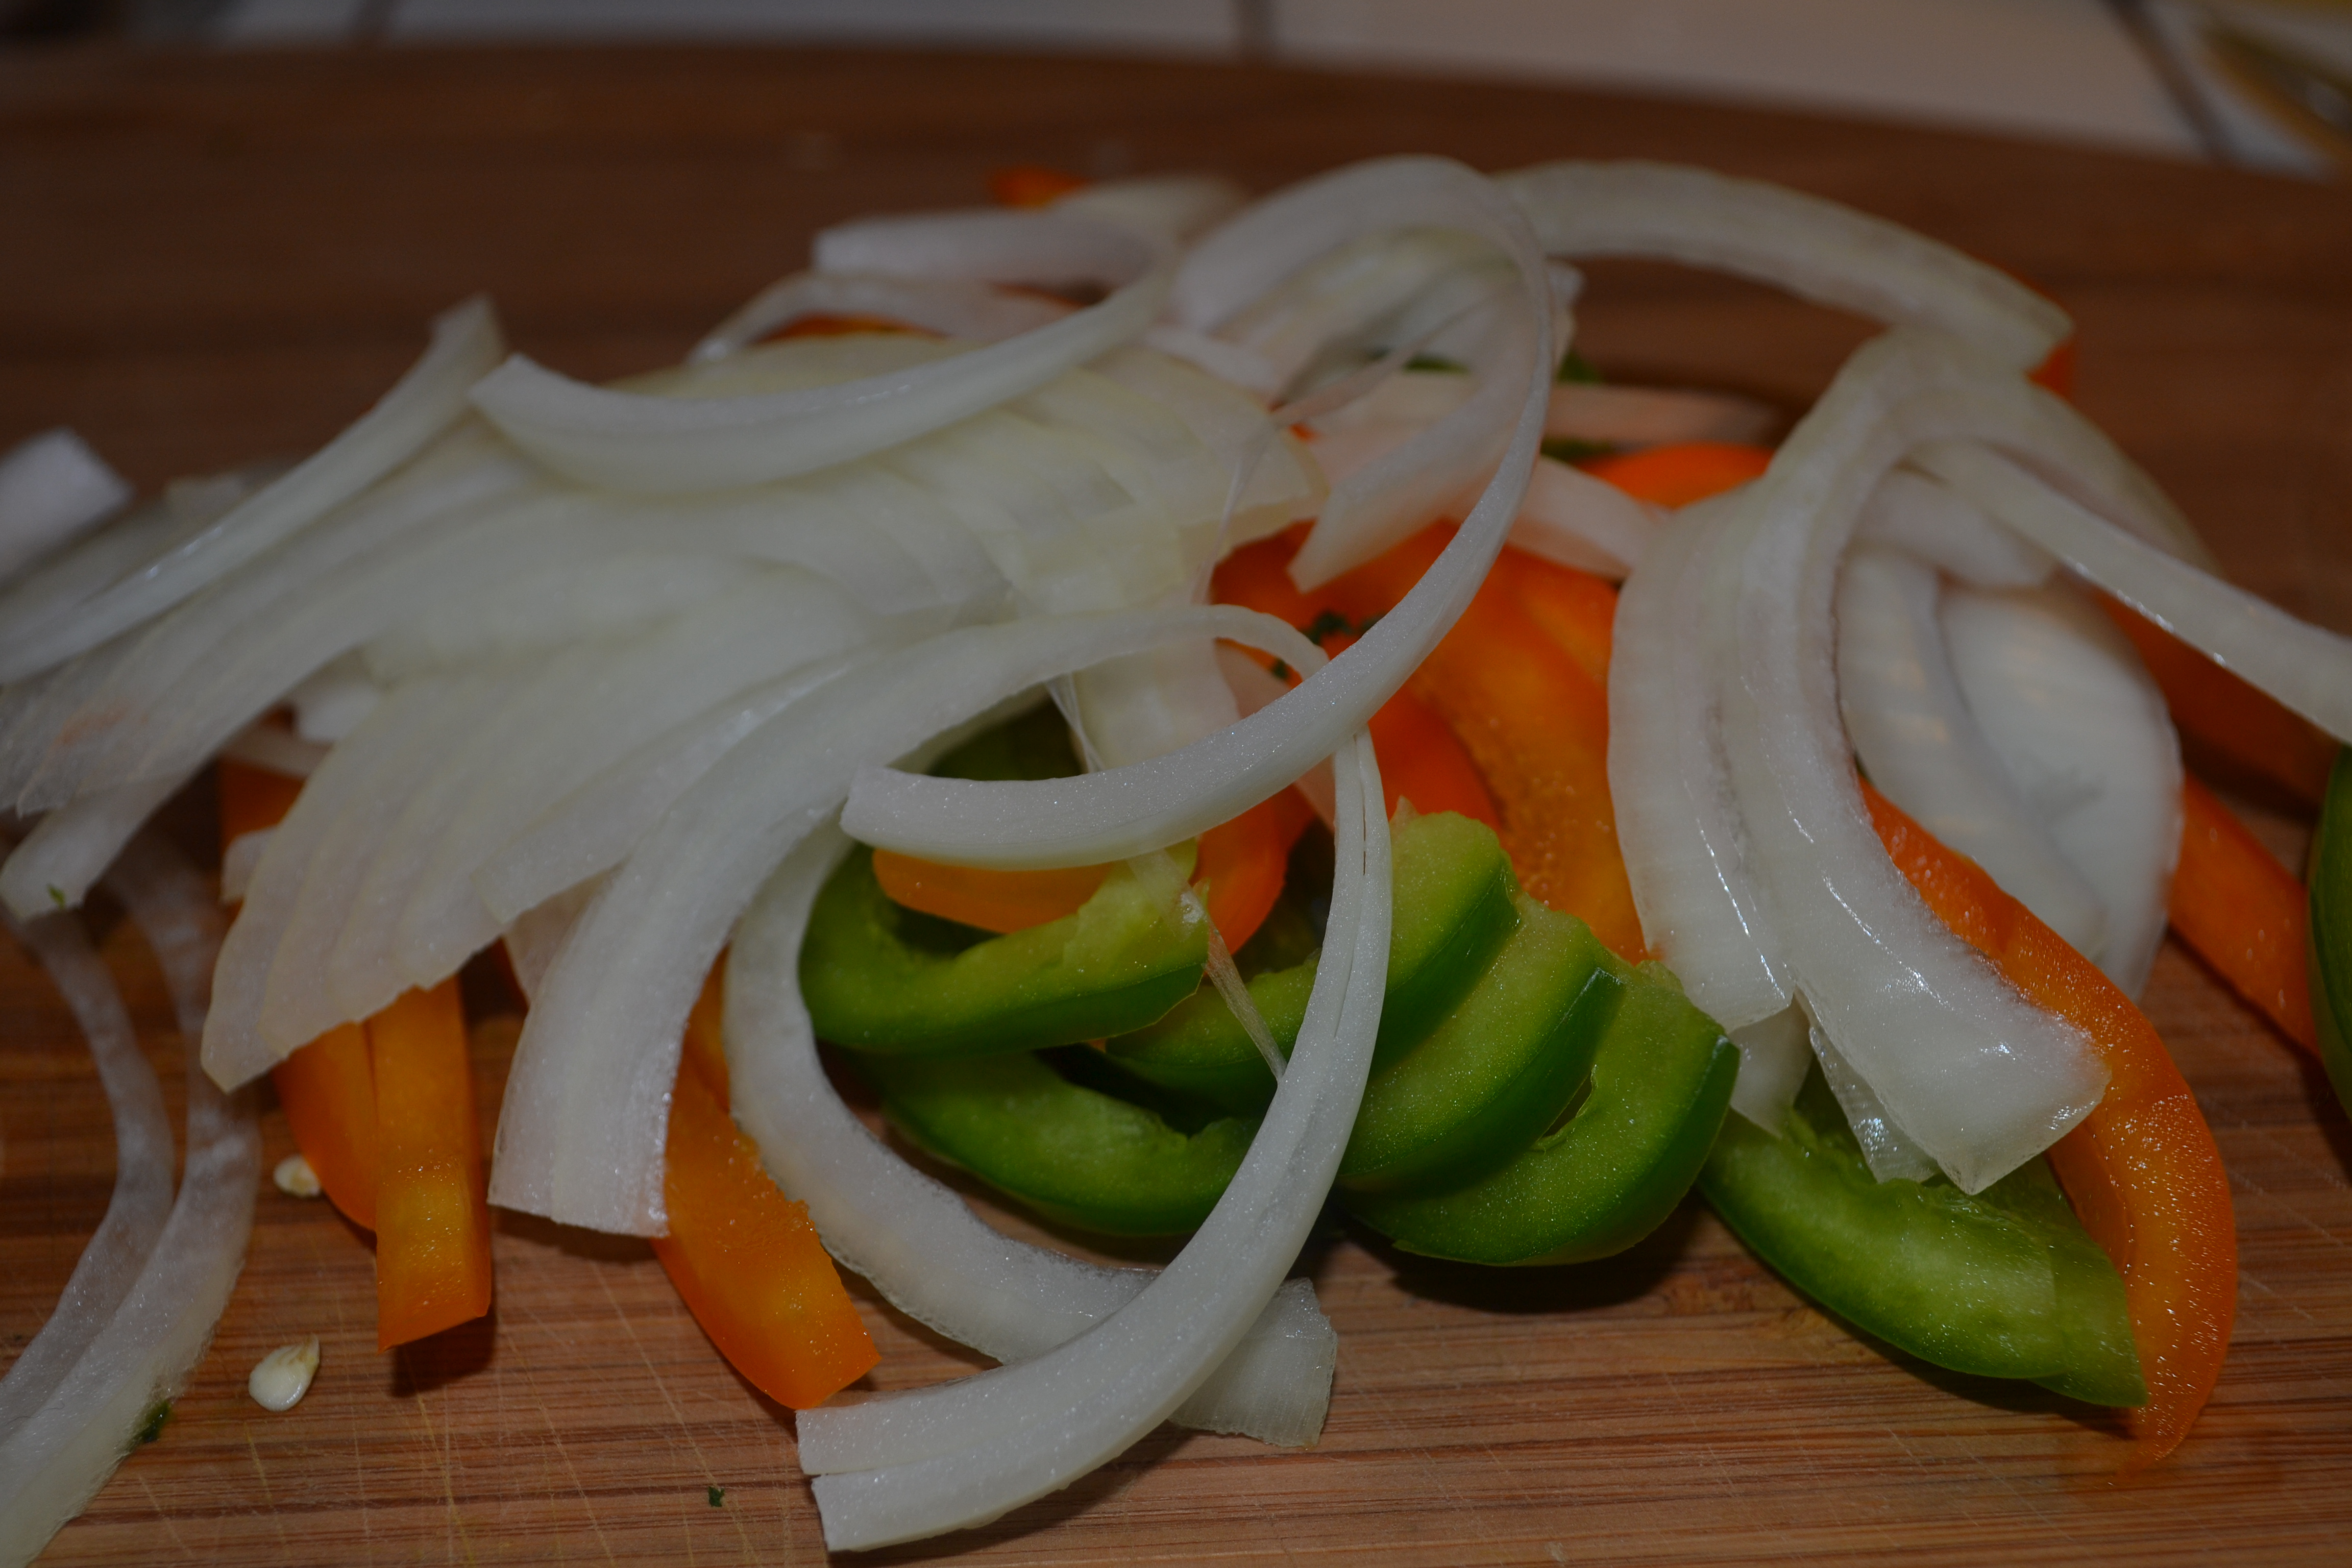 Sliced Onion and Peppers